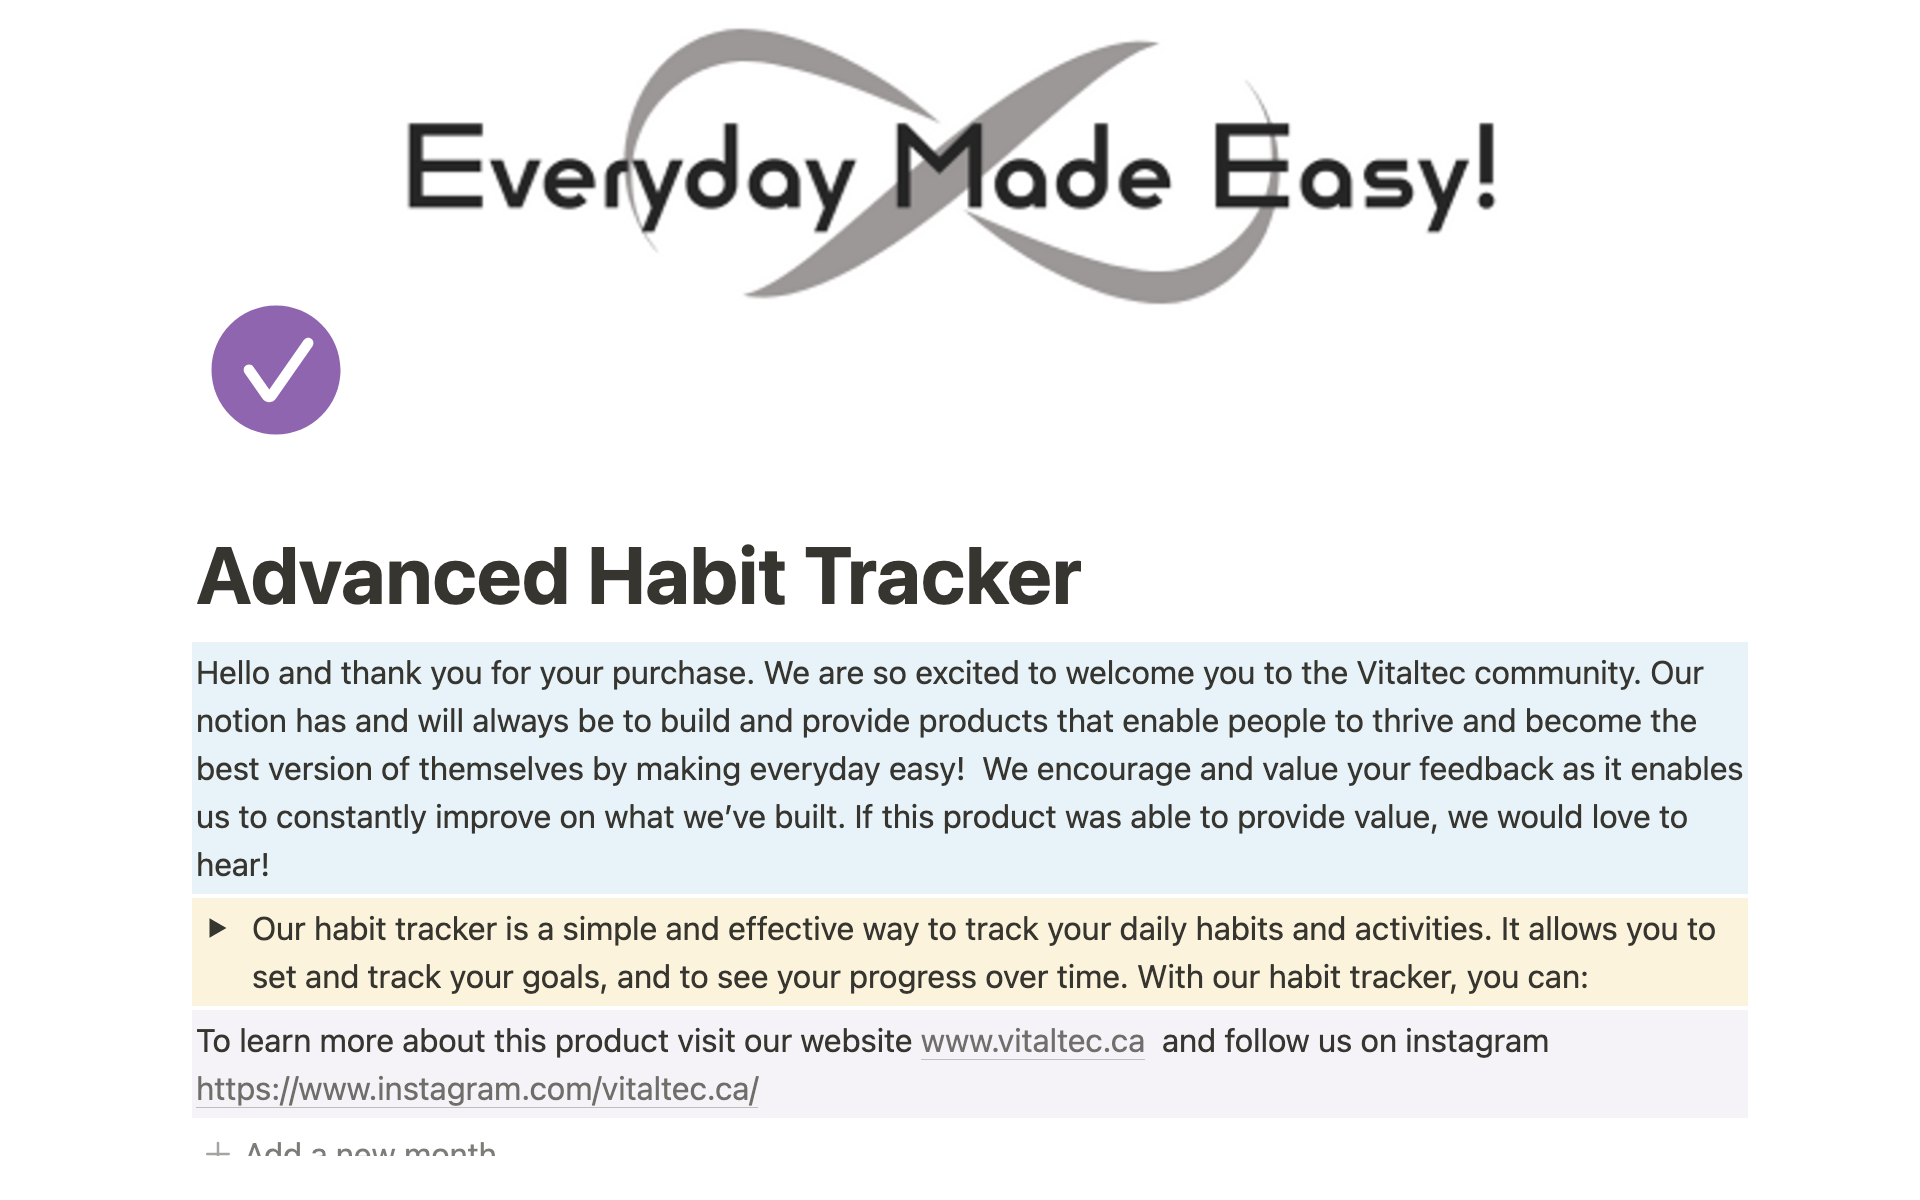 Makes habit tracking effective and fun